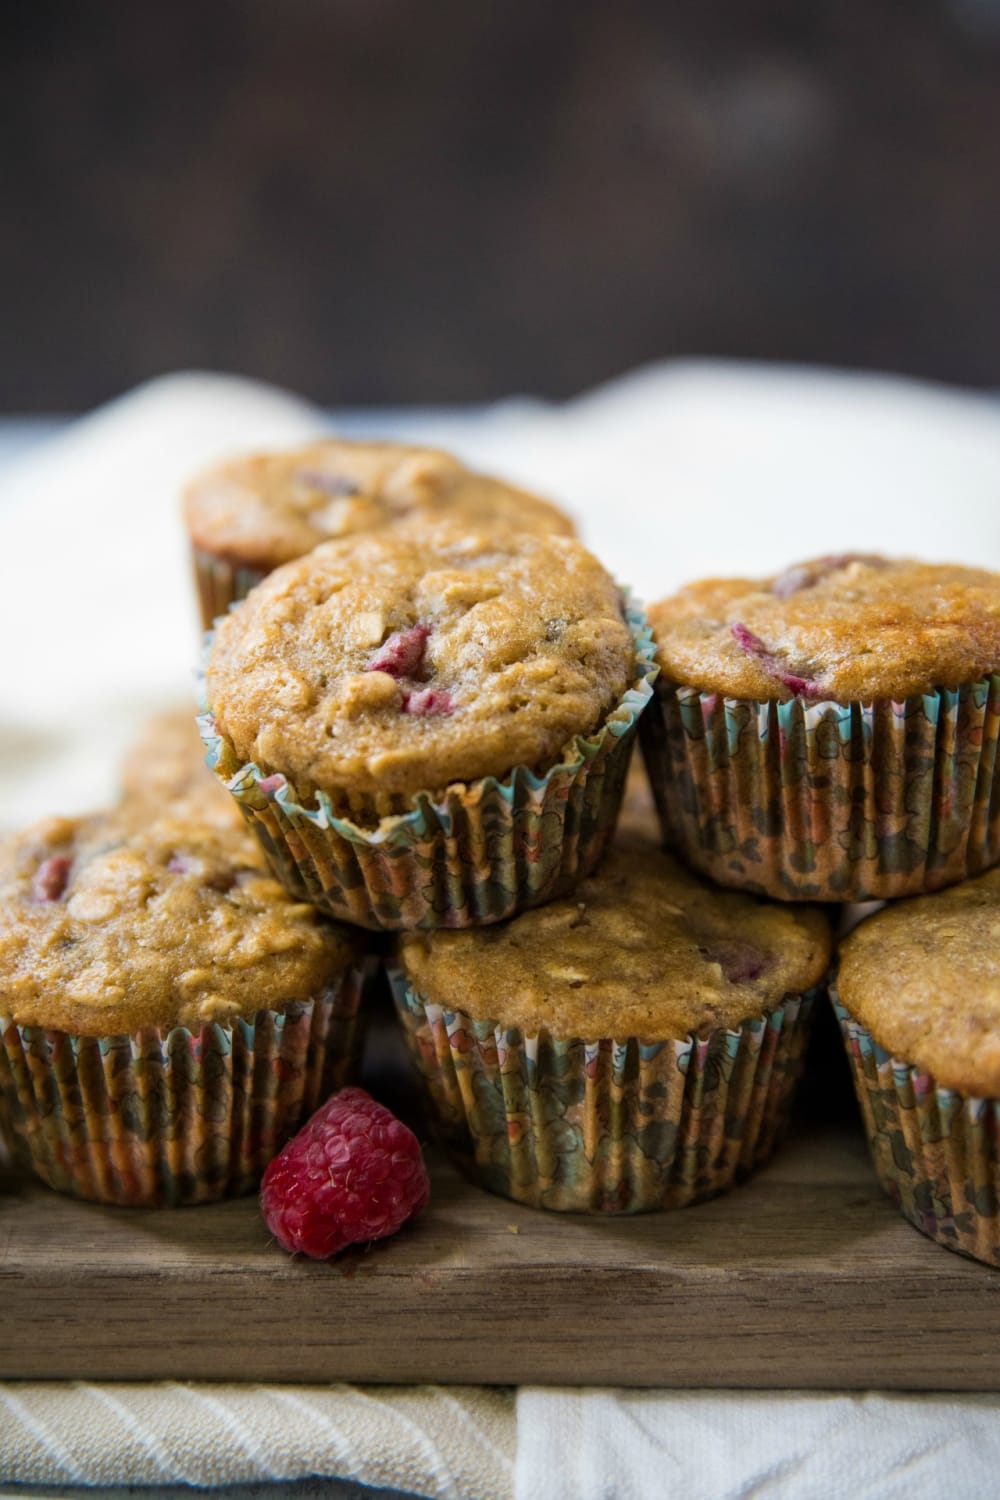 These raspberry oatmeal muffins are simple, wholesome, and satisfying.